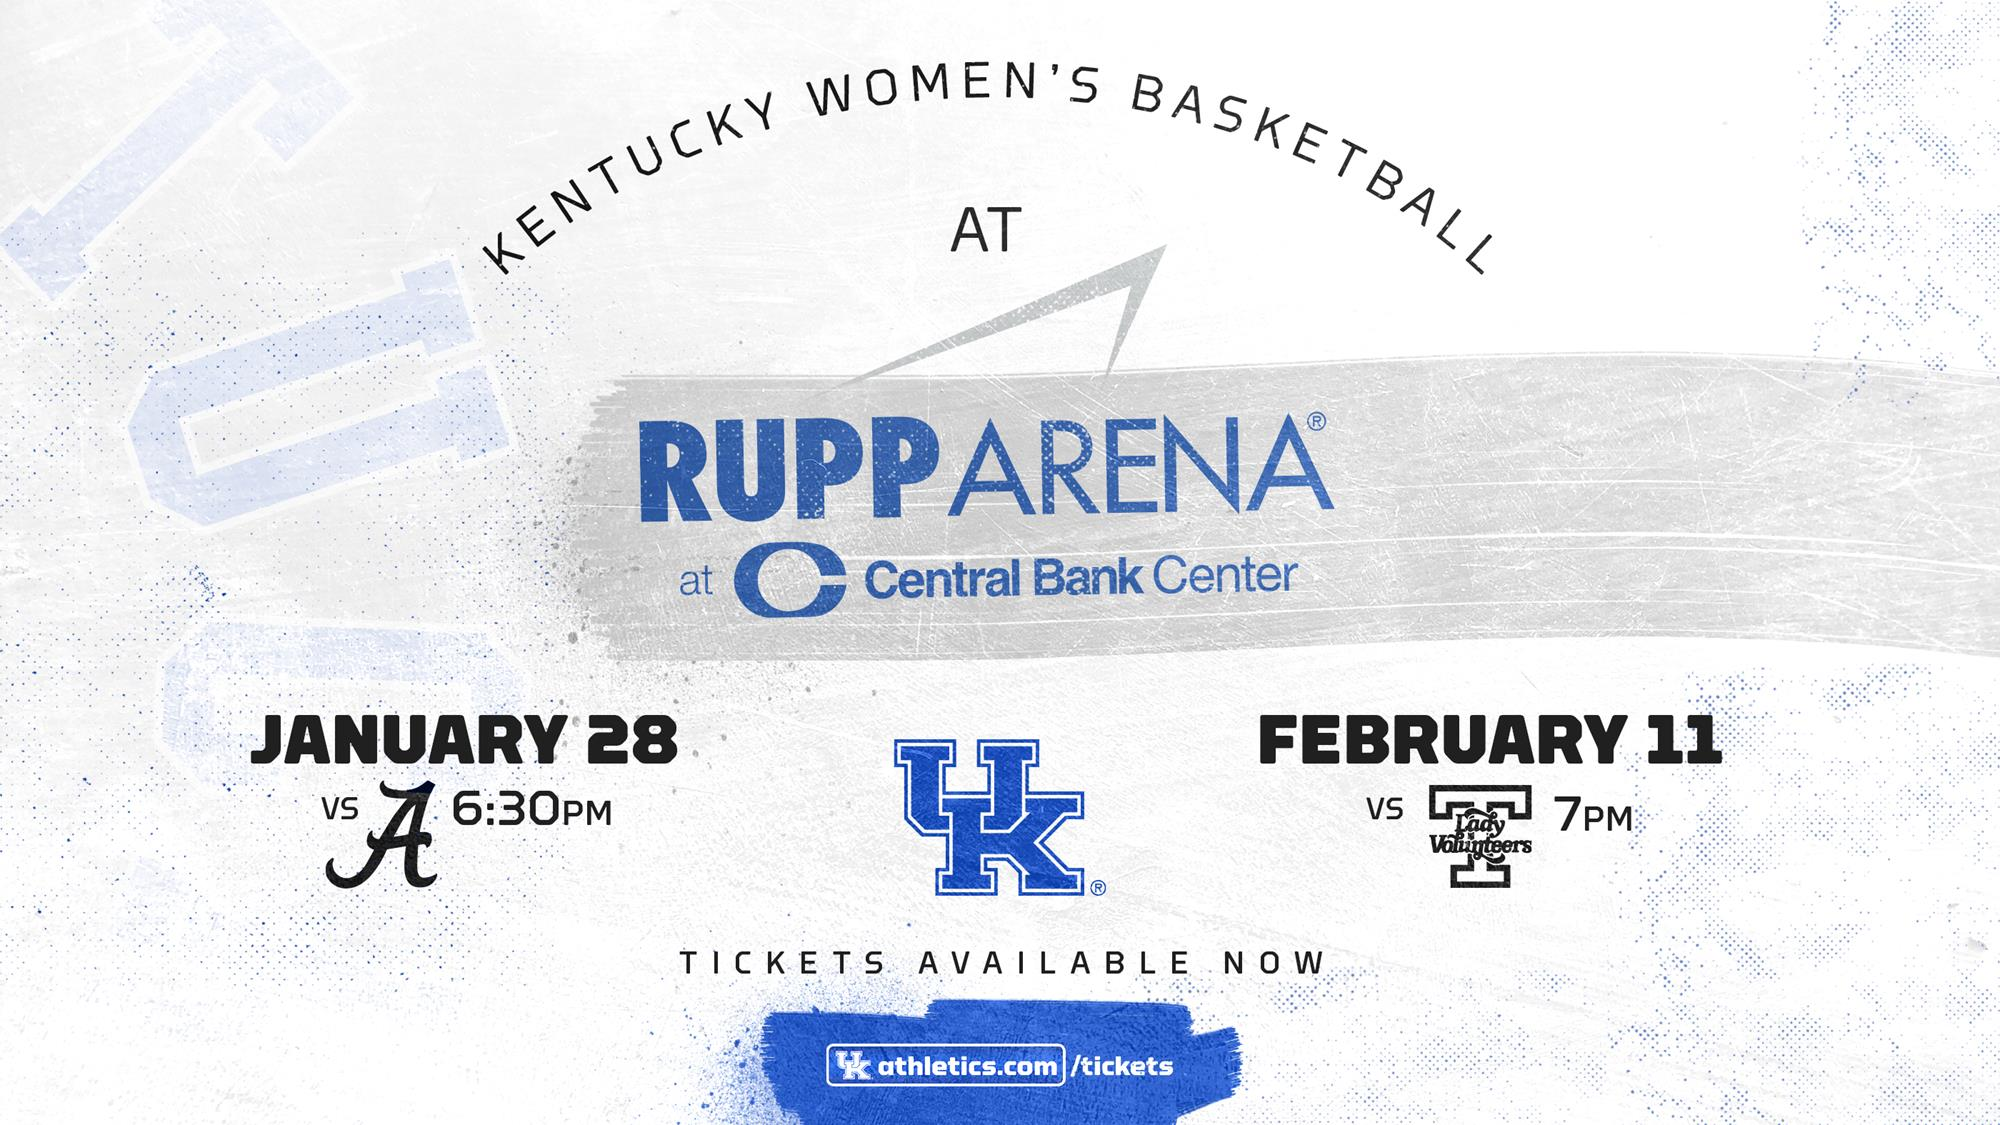 Tickets On Sale Thursday for Kentucky WBB Games at Rupp Arena at Central Bank Center